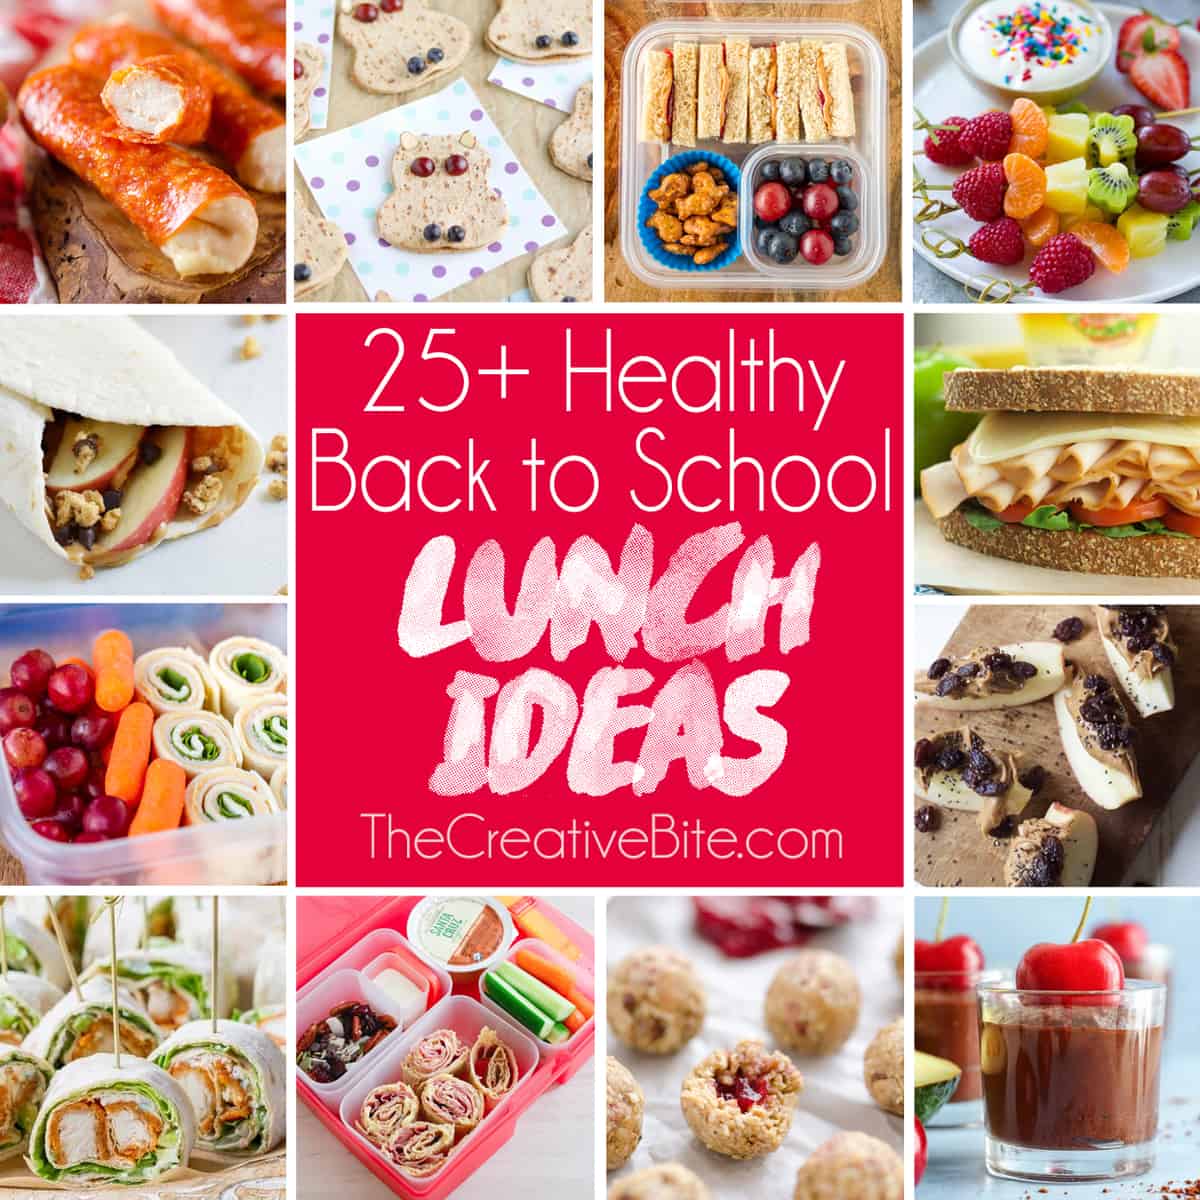 https://www.thecreativebite.com/wp-content/uploads/2017/09/25-Healthy-Back-to-School-Lunch-Ideas-instagram-collage.jpg